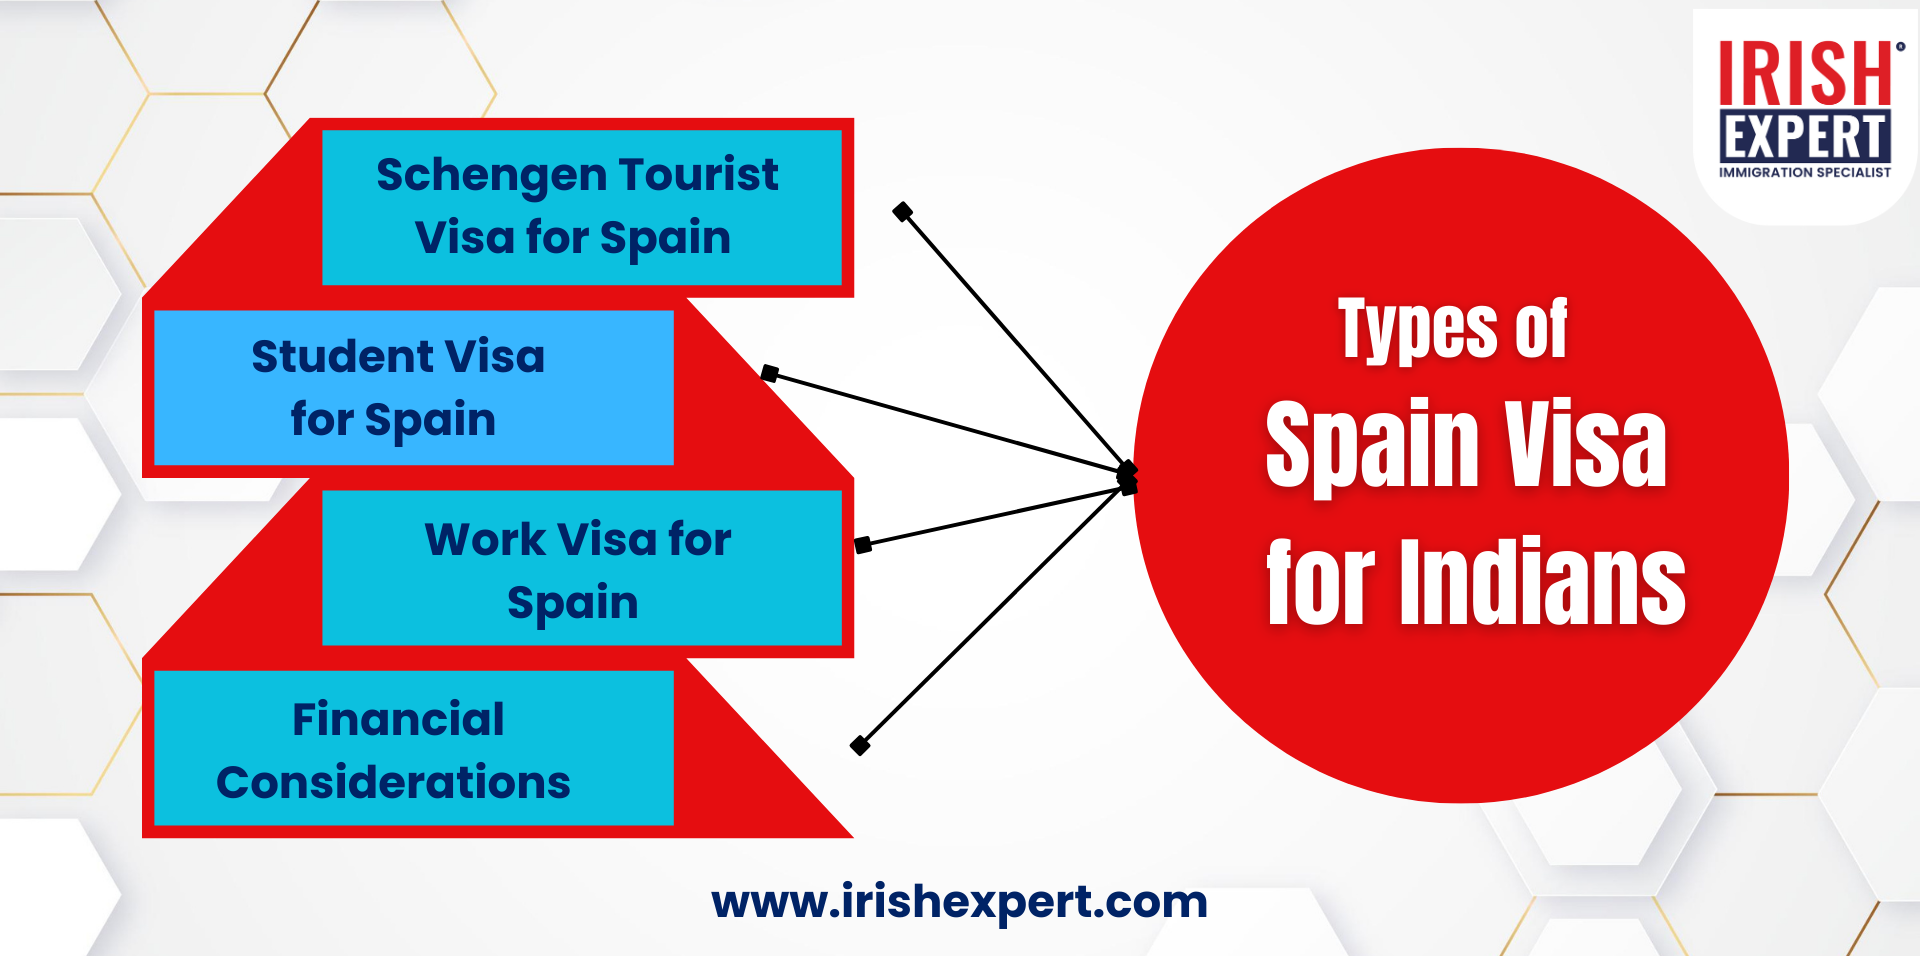 Types of Spain Visa for Indians